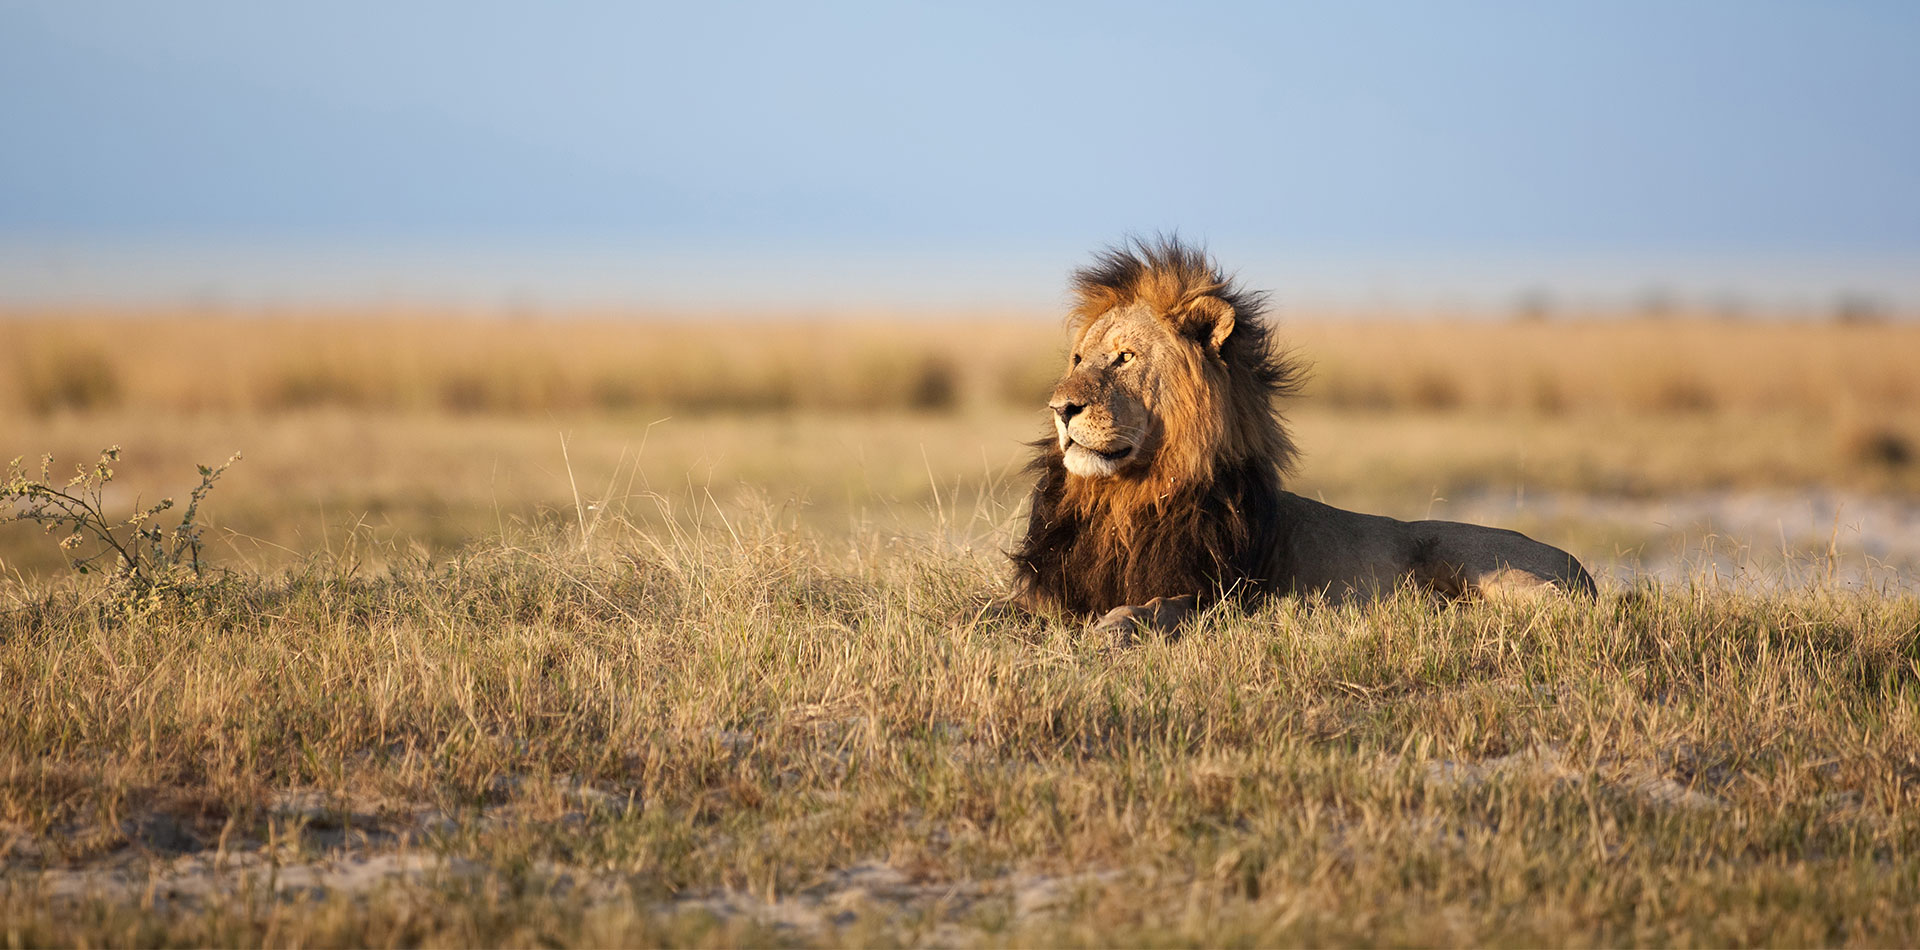 Male Lion in South Africa